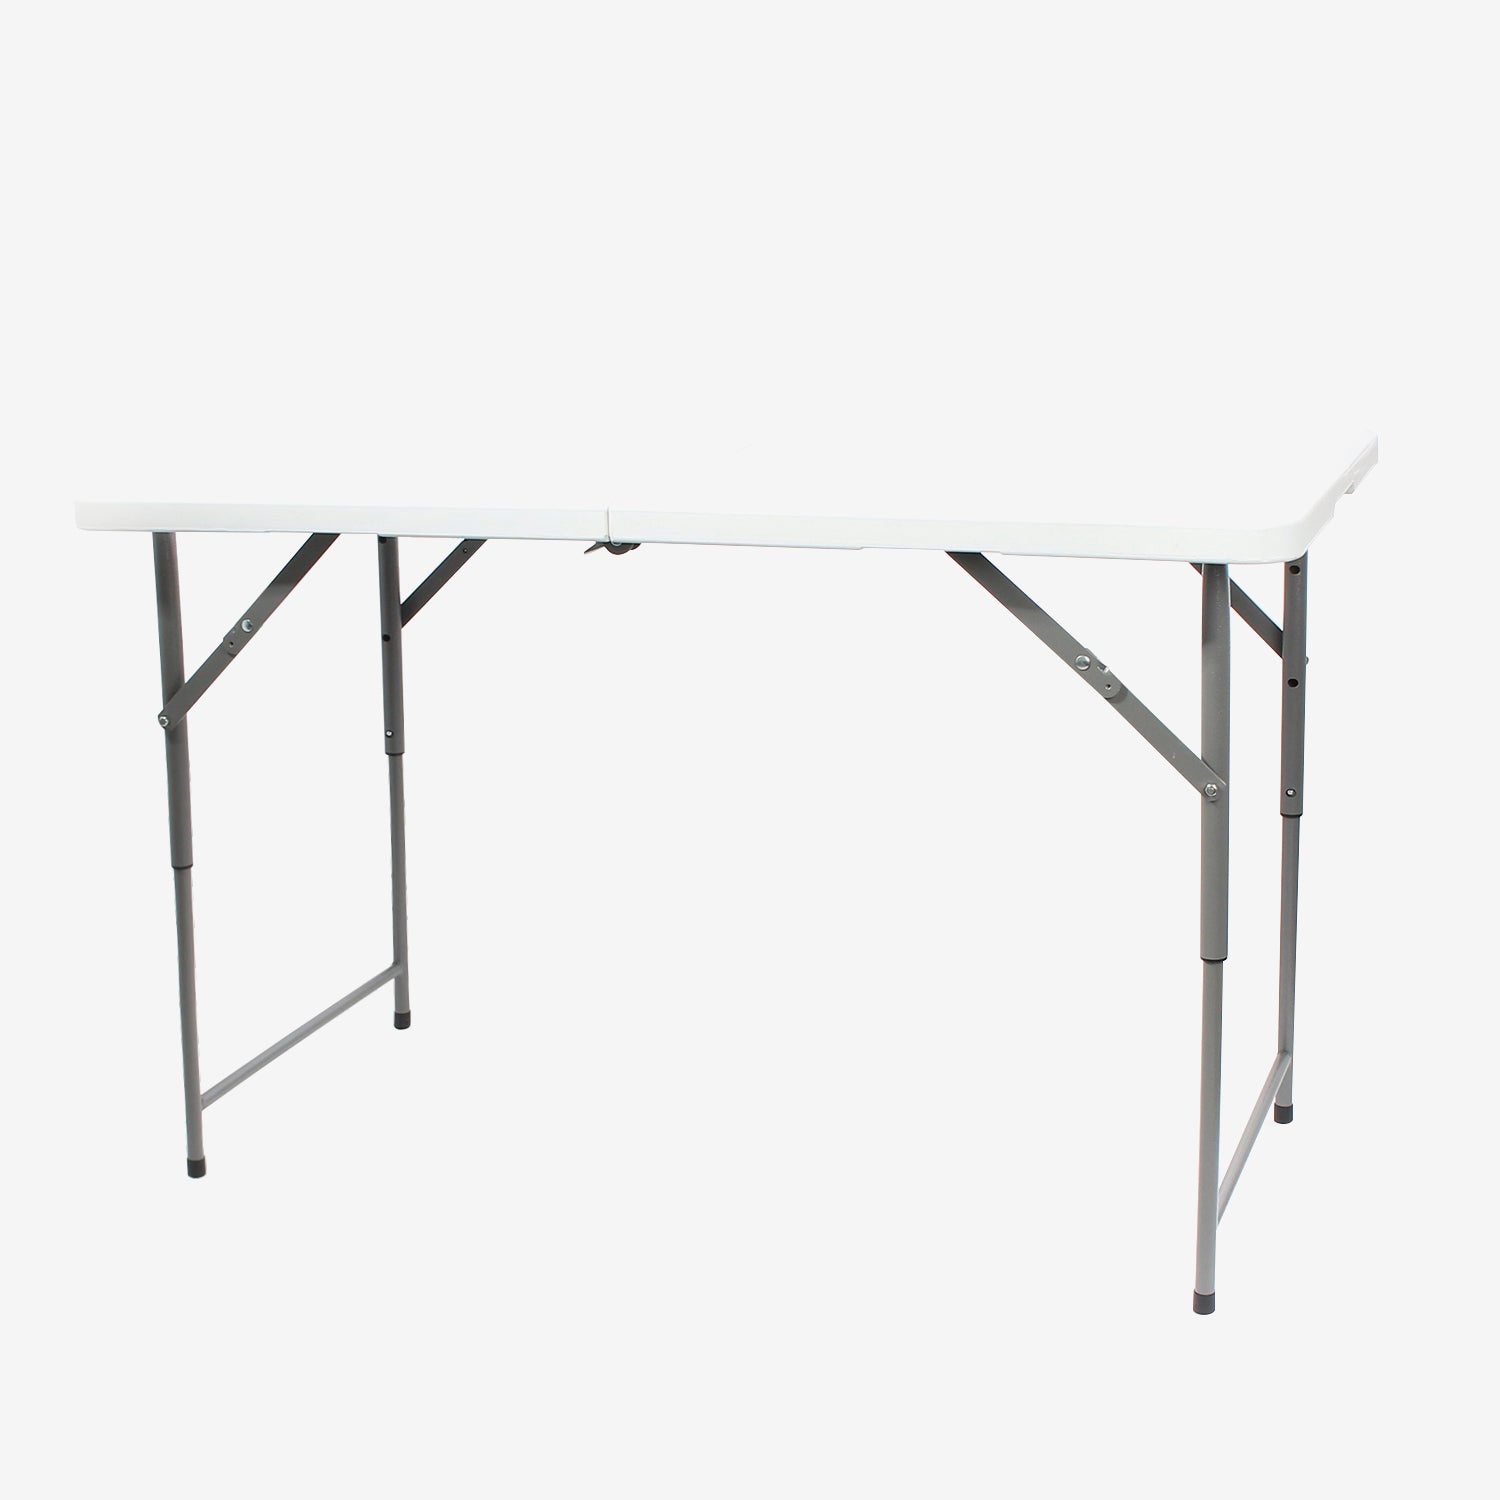 Compact-and-Foldable-Table-Adjustable-Folding-Table-122-x61x-50-62-74-cm-48-03-x-24-01-x-19-68-24-4-29-13-inch-White-Material-Steel-Top-surface-76-x-50-cm